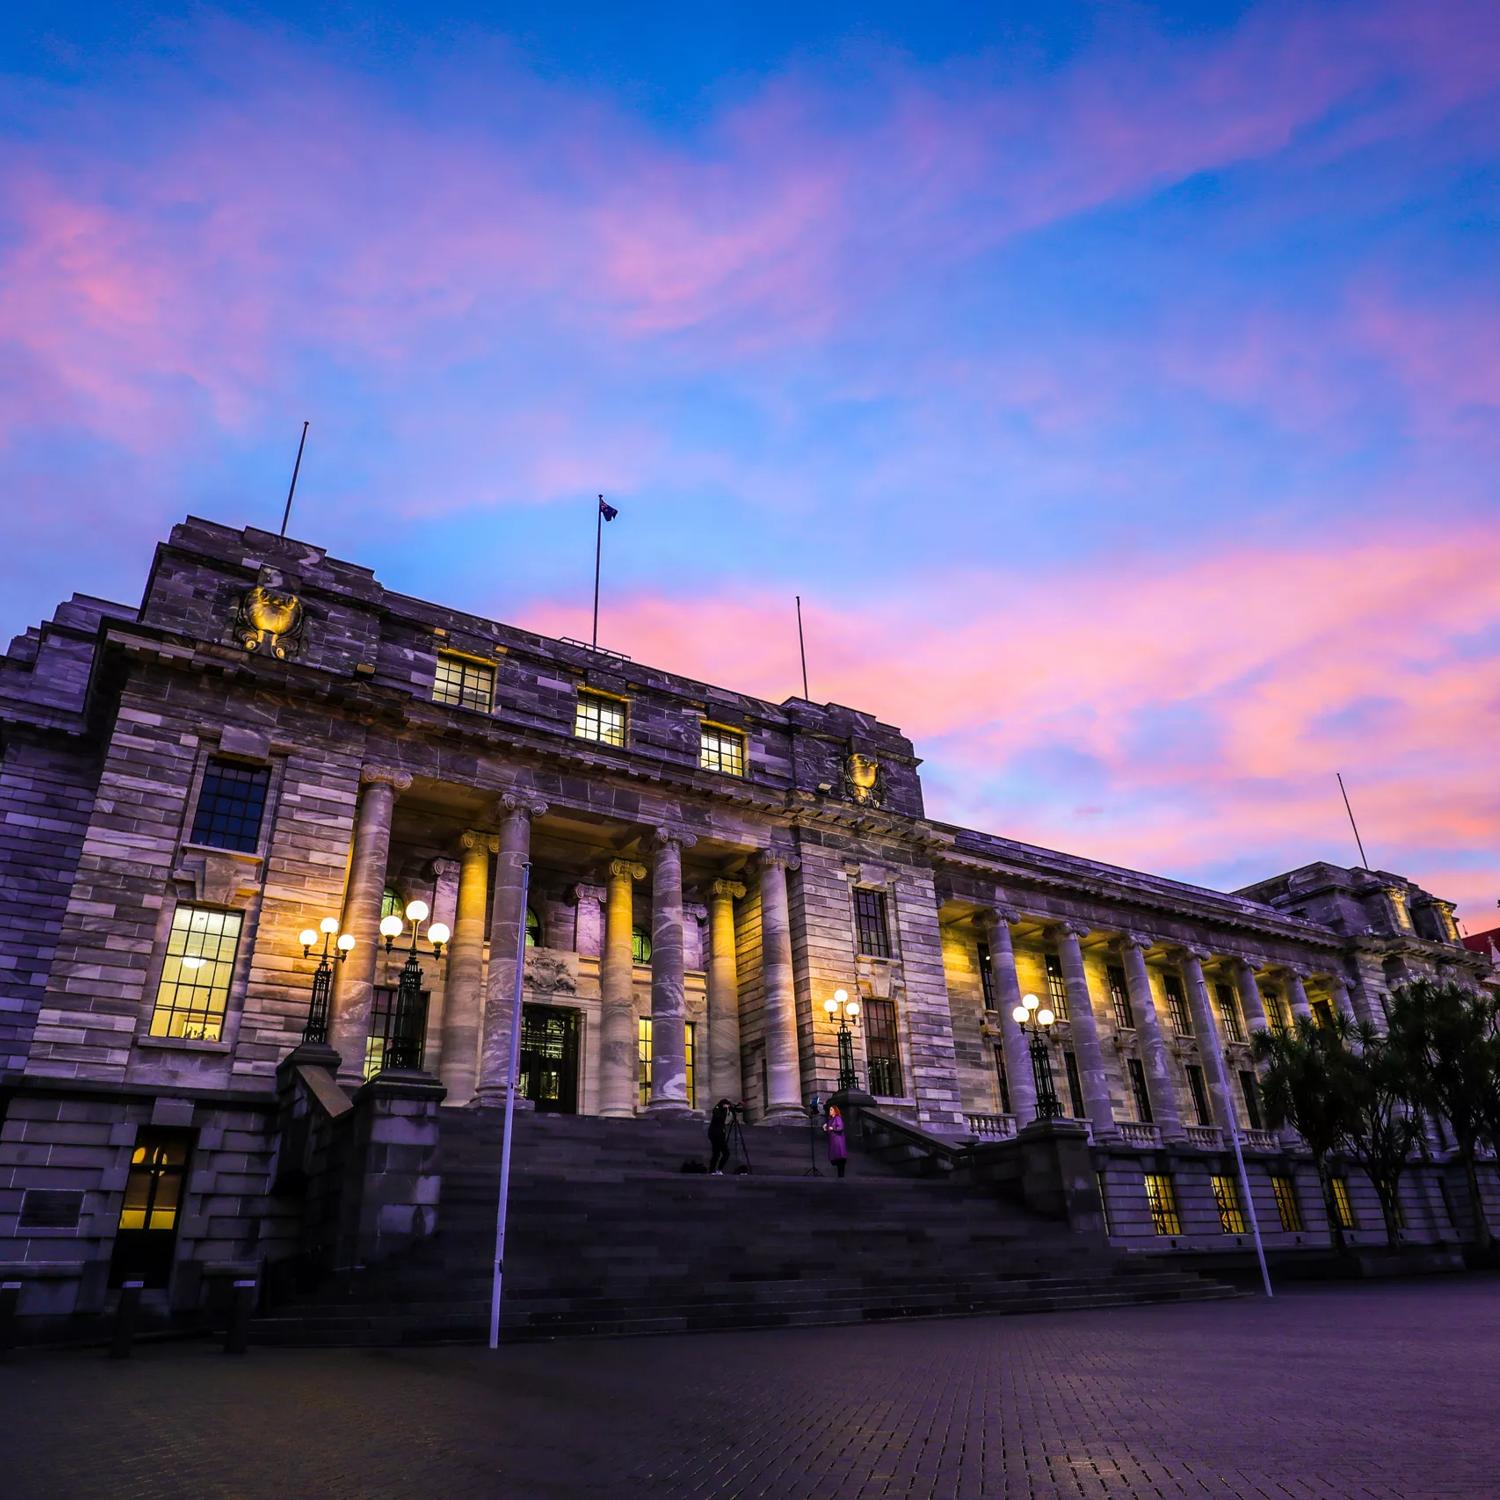 The exterior of the New Zealand Parliament building at 1 Museum Street, Pipitea in Wellington at sunset with pink-coloured clouds in the sky above. 